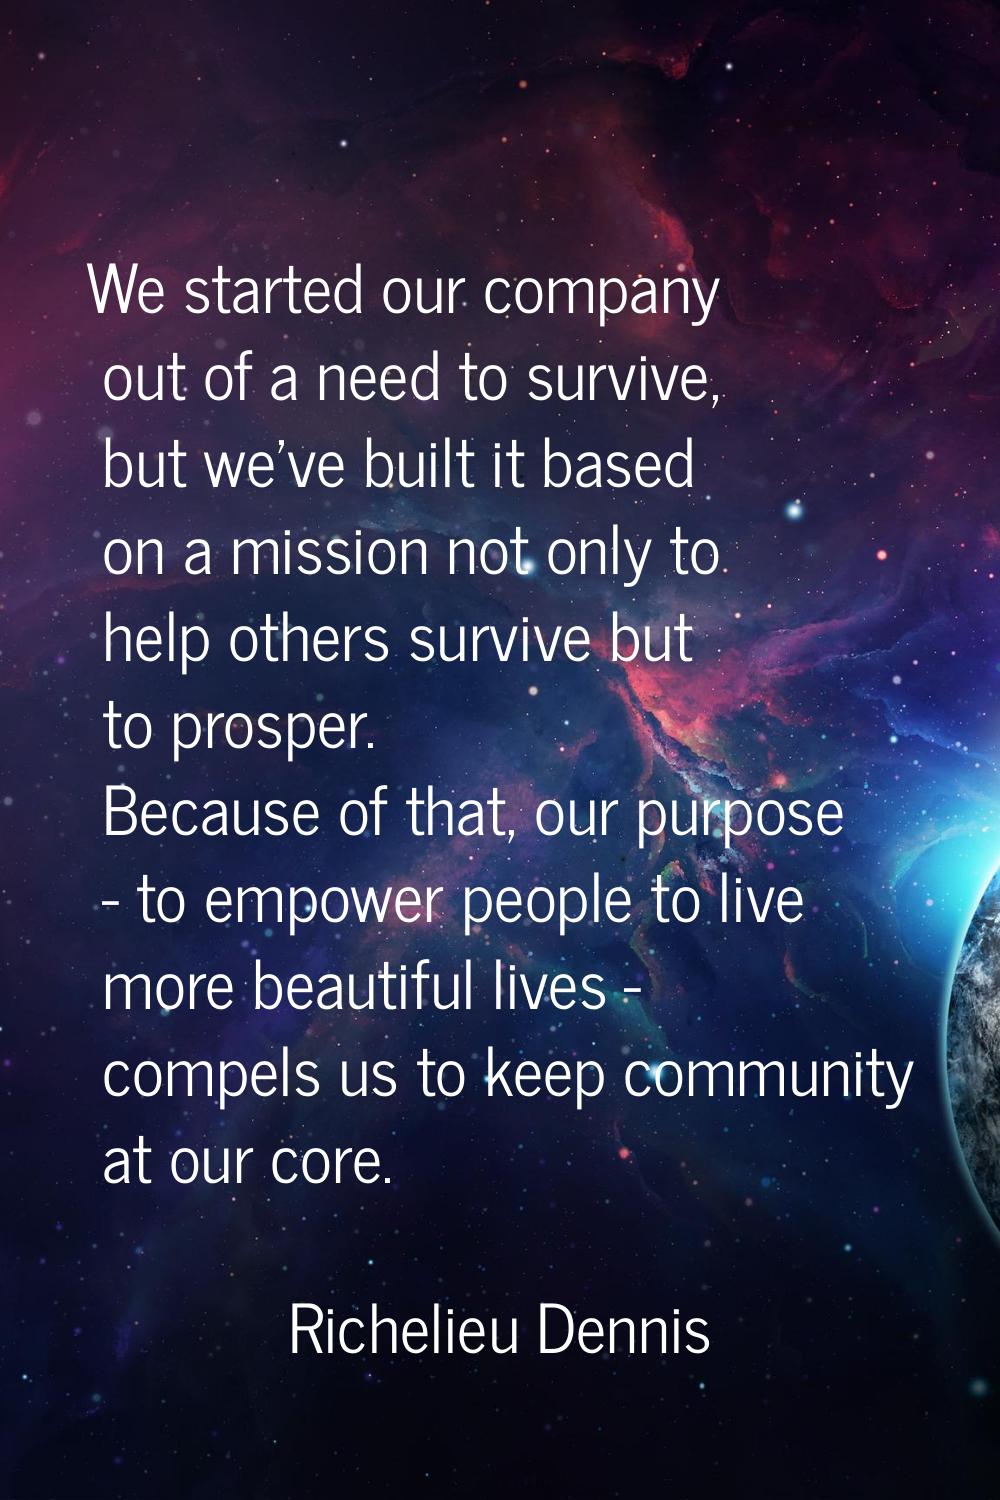 We started our company out of a need to survive, but we've built it based on a mission not only to 